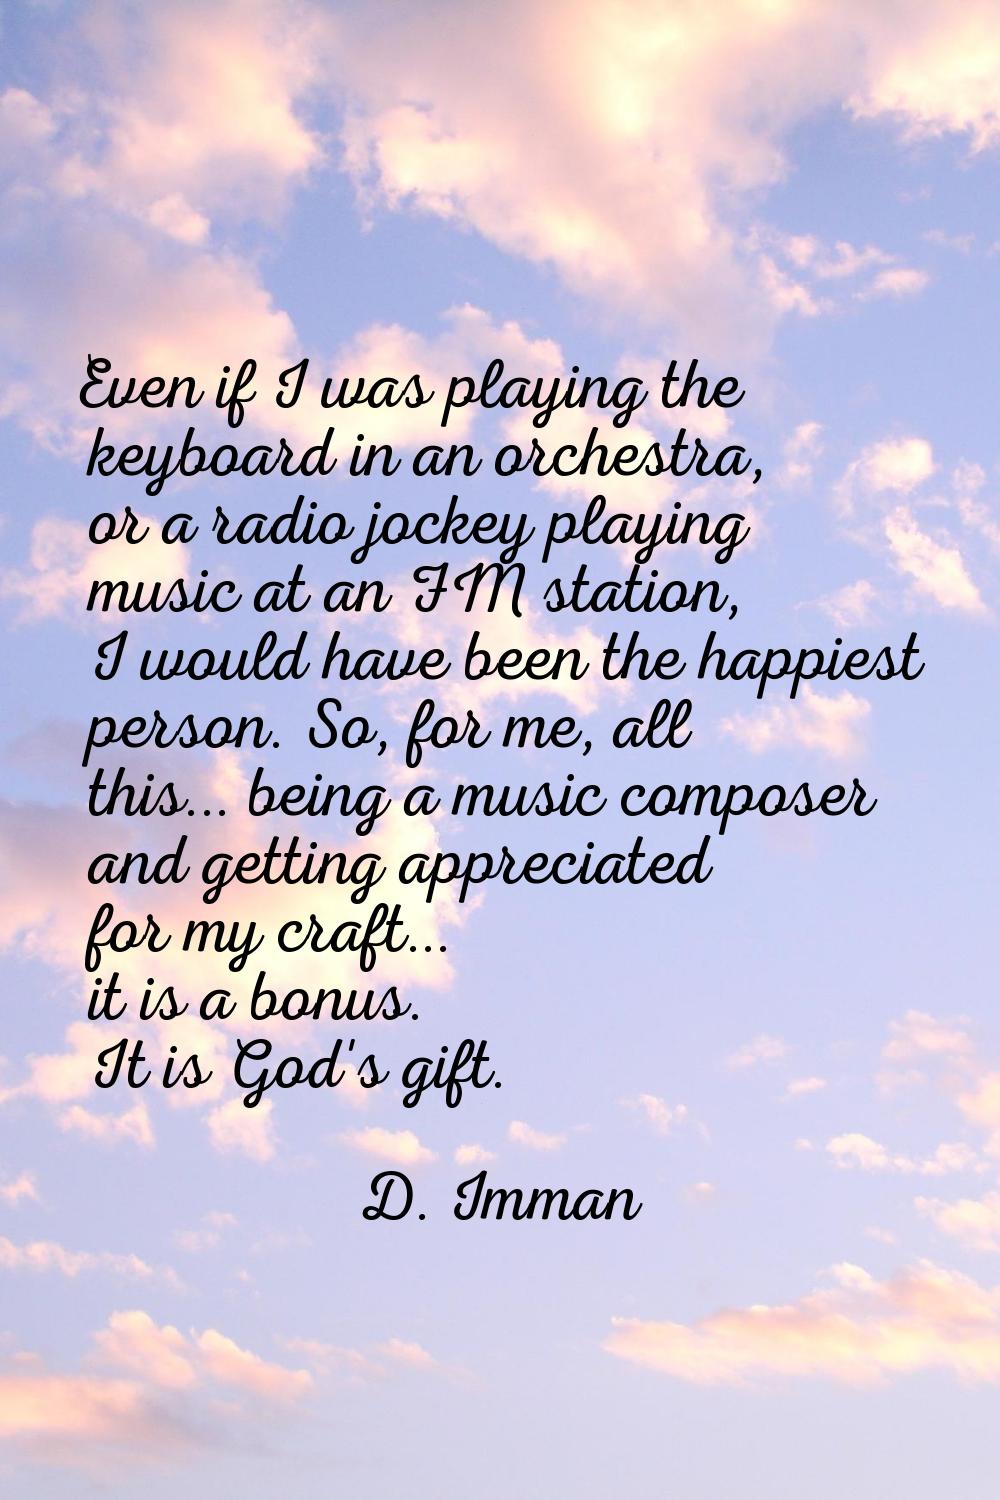 Even if I was playing the keyboard in an orchestra, or a radio jockey playing music at an FM statio